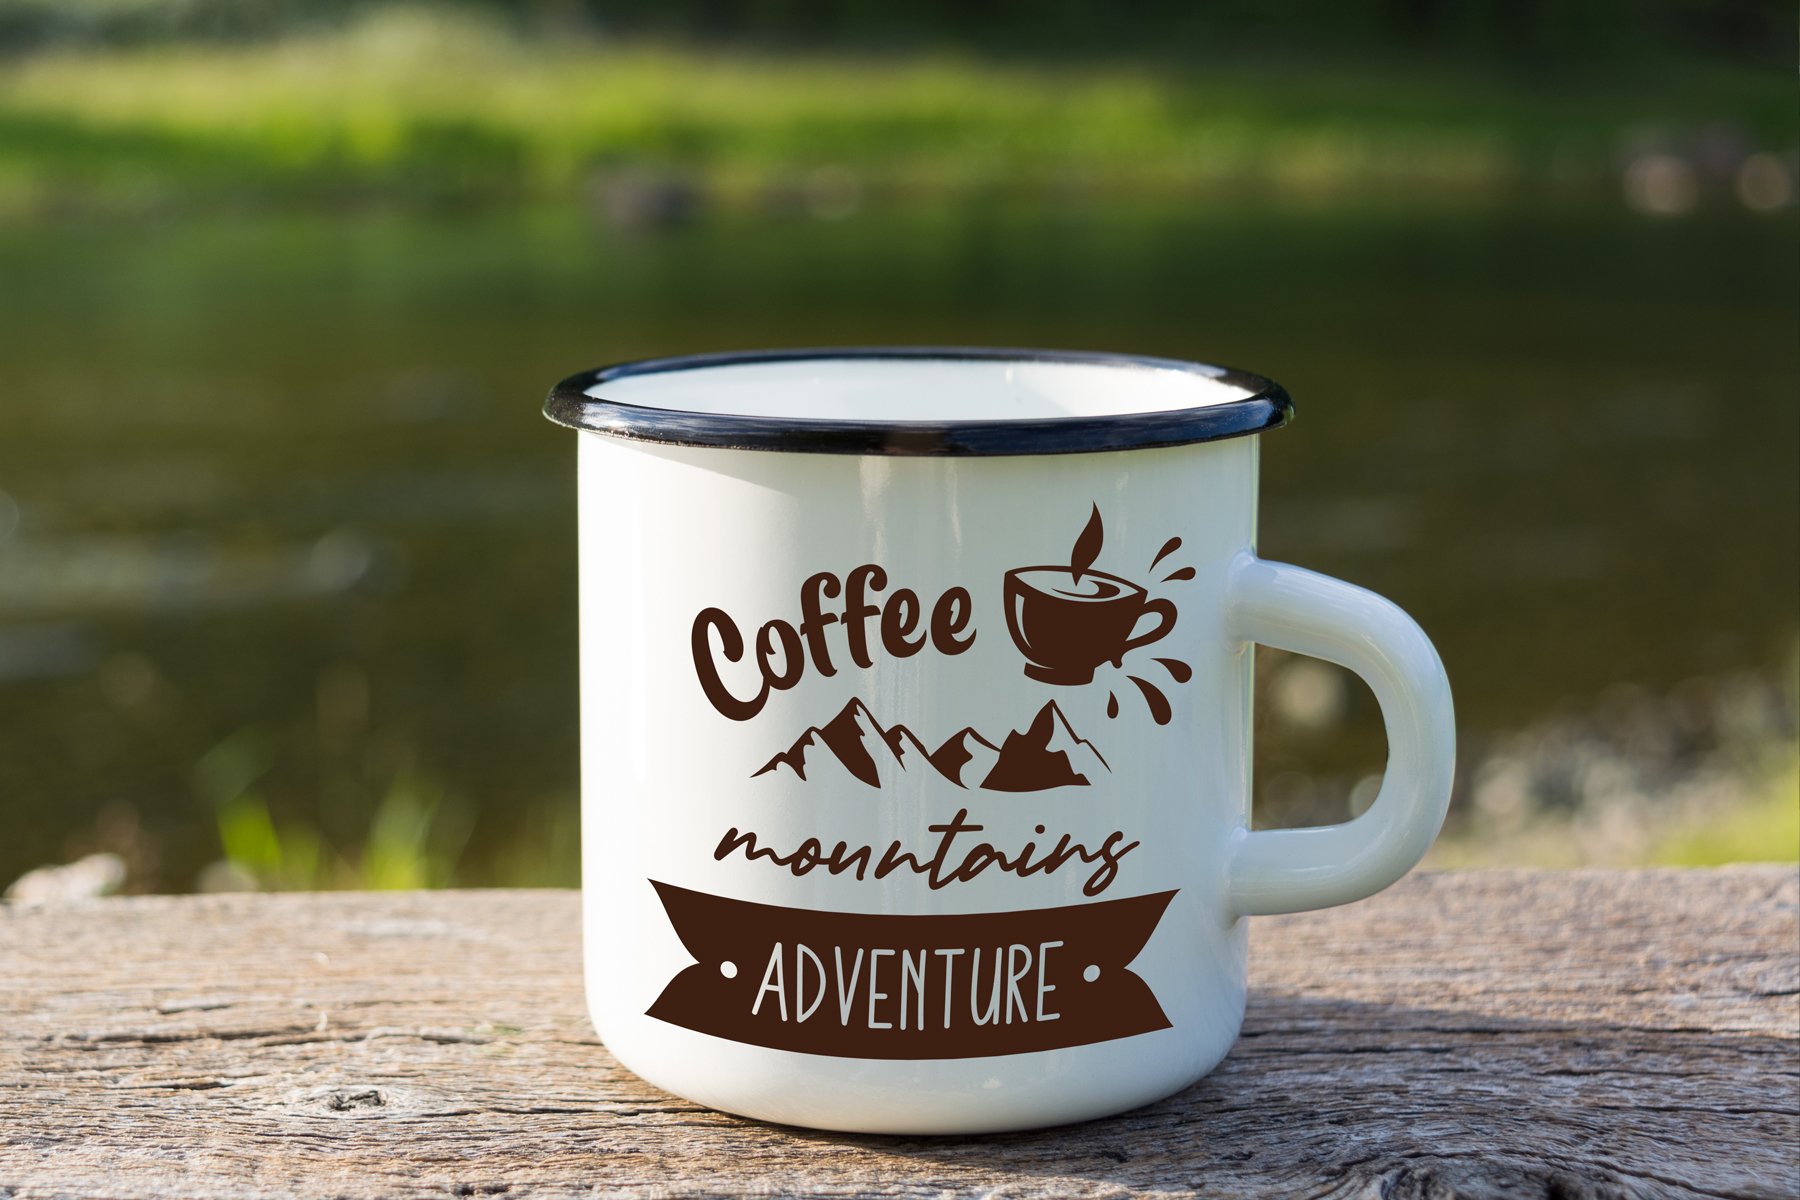 Coffee cup for camping experience.